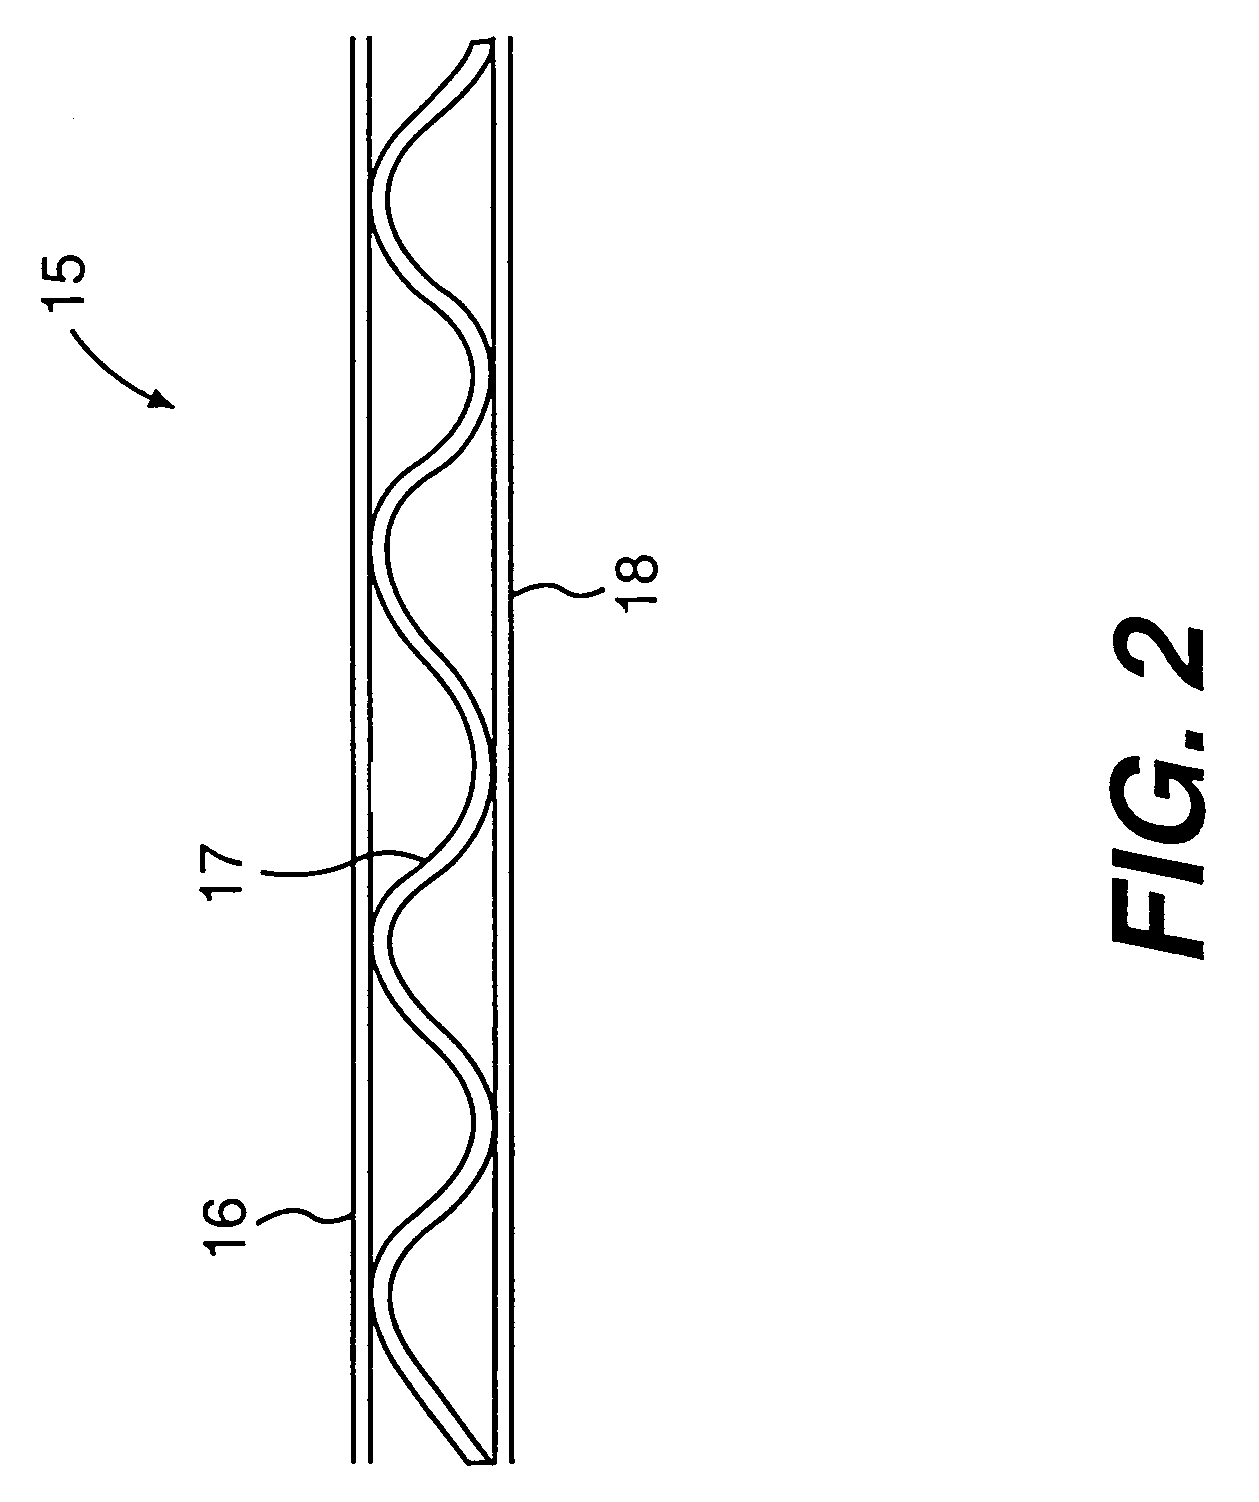 Enhanced multi-ply tissue products